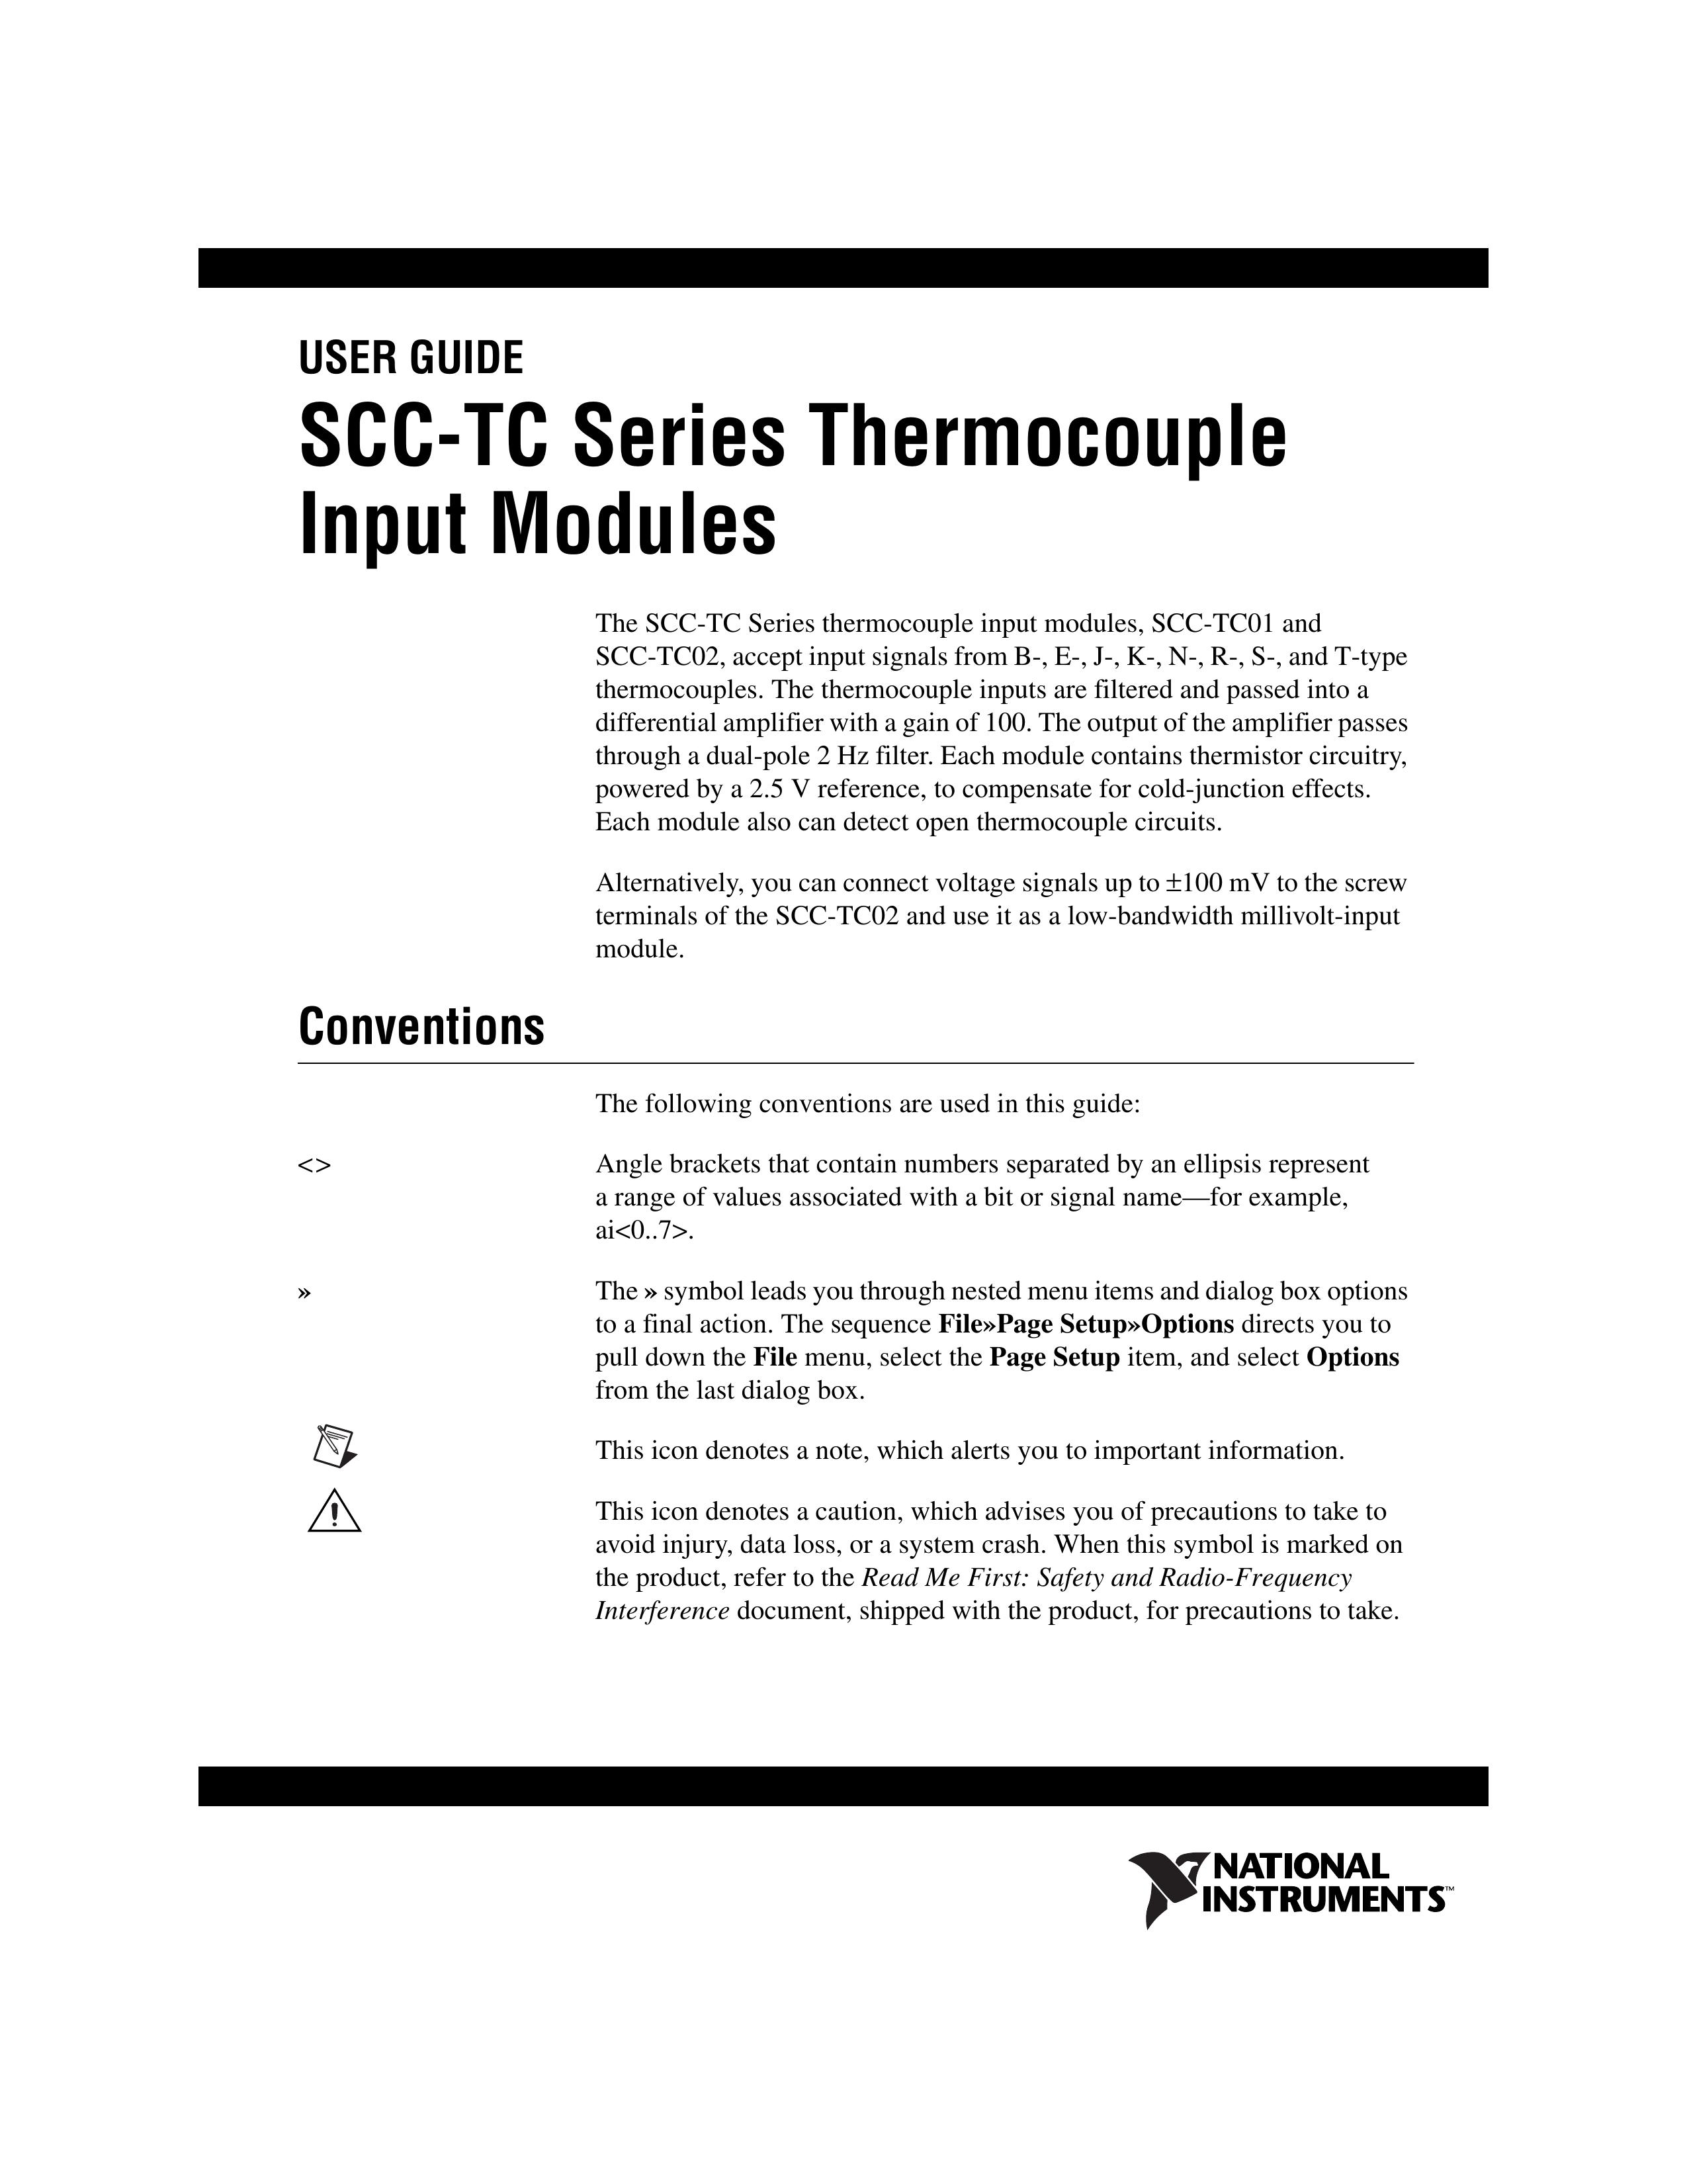 National Instruments SCC-TC02 Thermometer User Manual